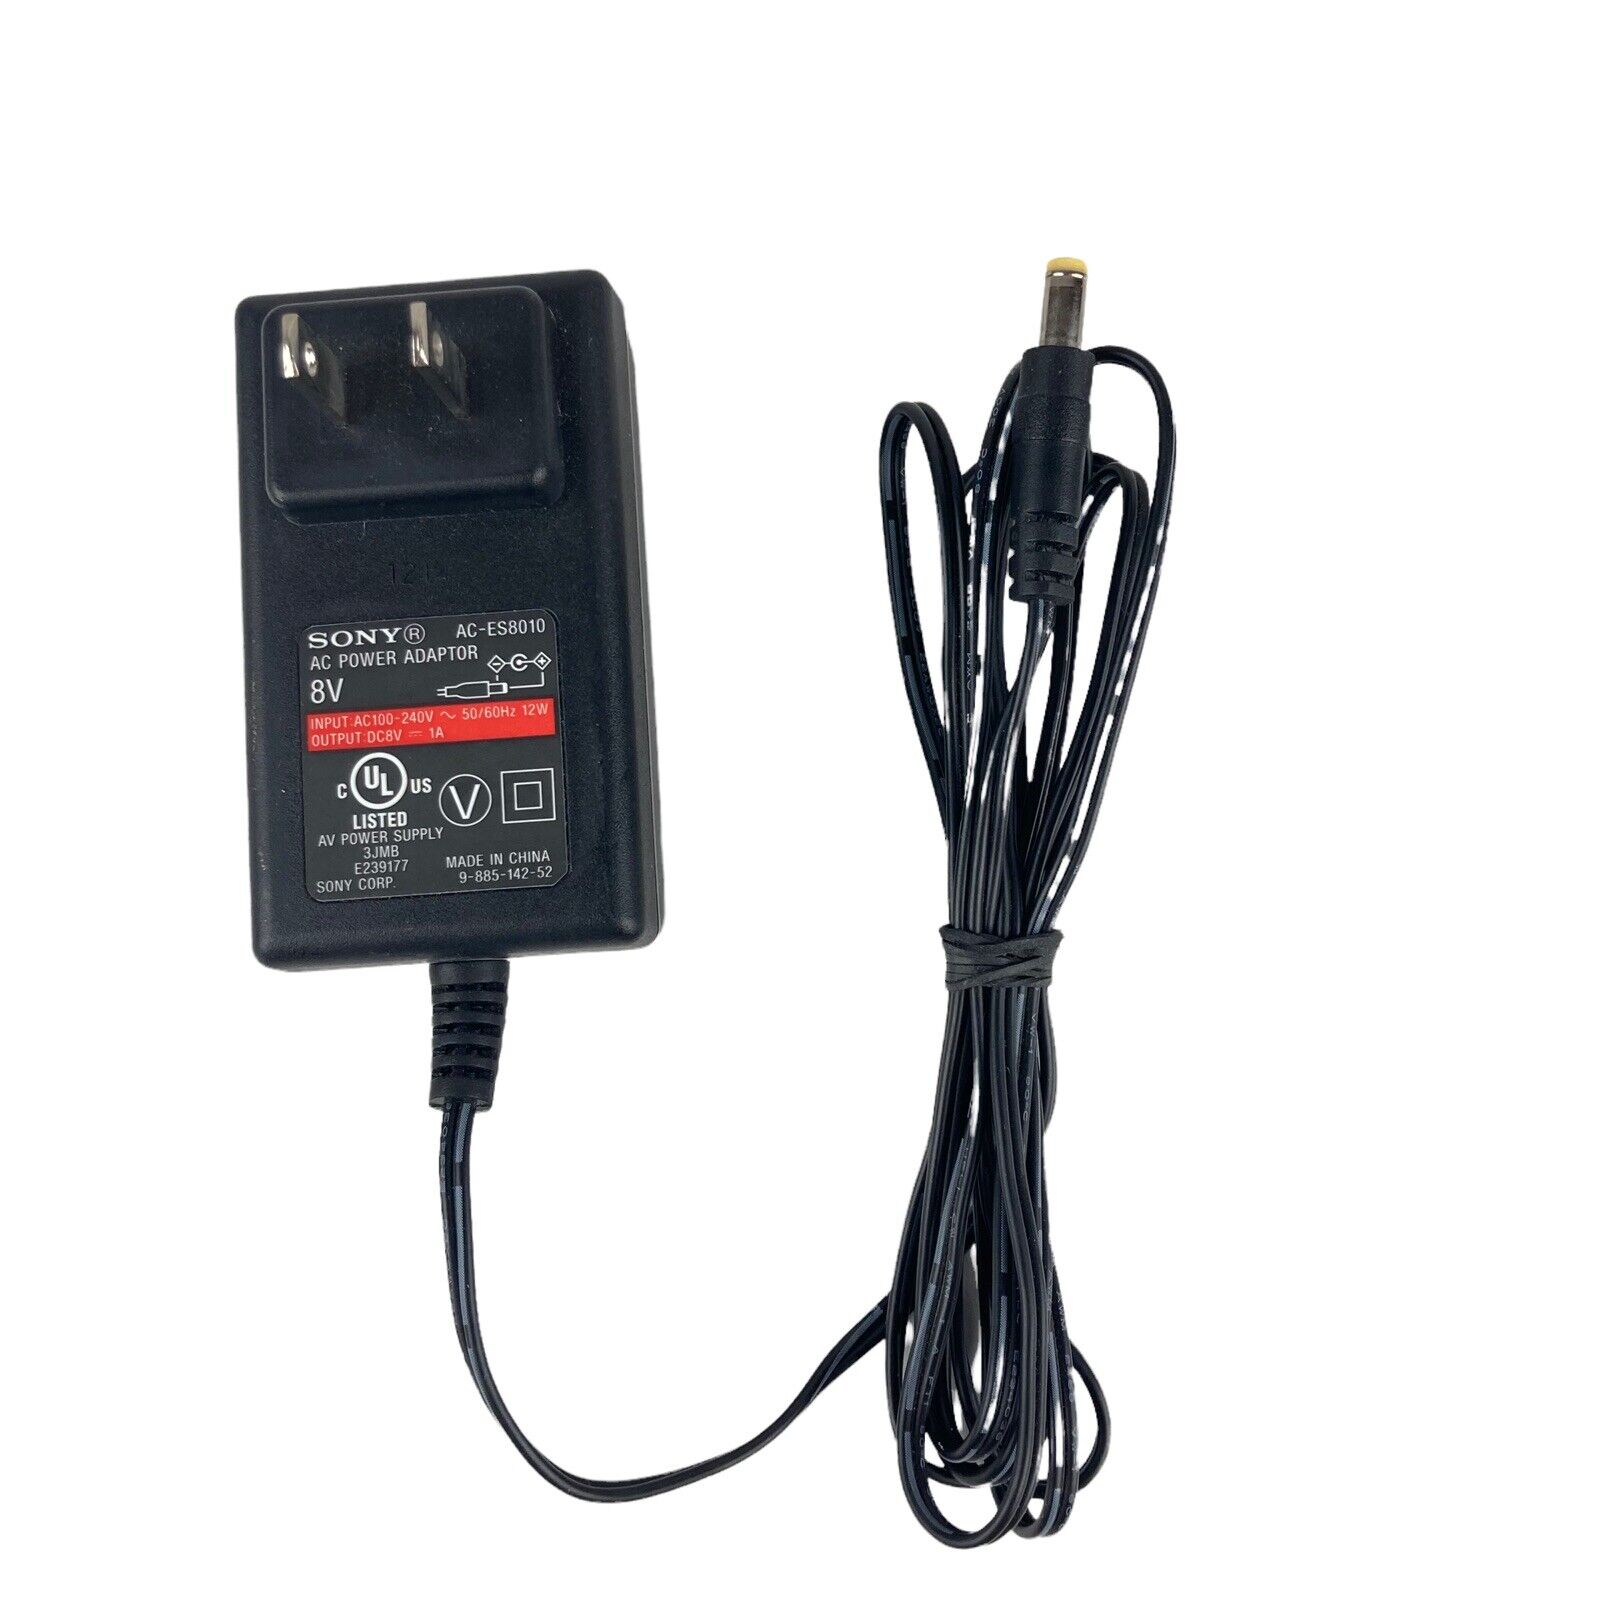 8V 1A Genuine Sony AC-ES8010 Power AC/DC Adapter charger For ICF-C05iP TESTED Country/Region of Manufacture: China Cu - Click Image to Close